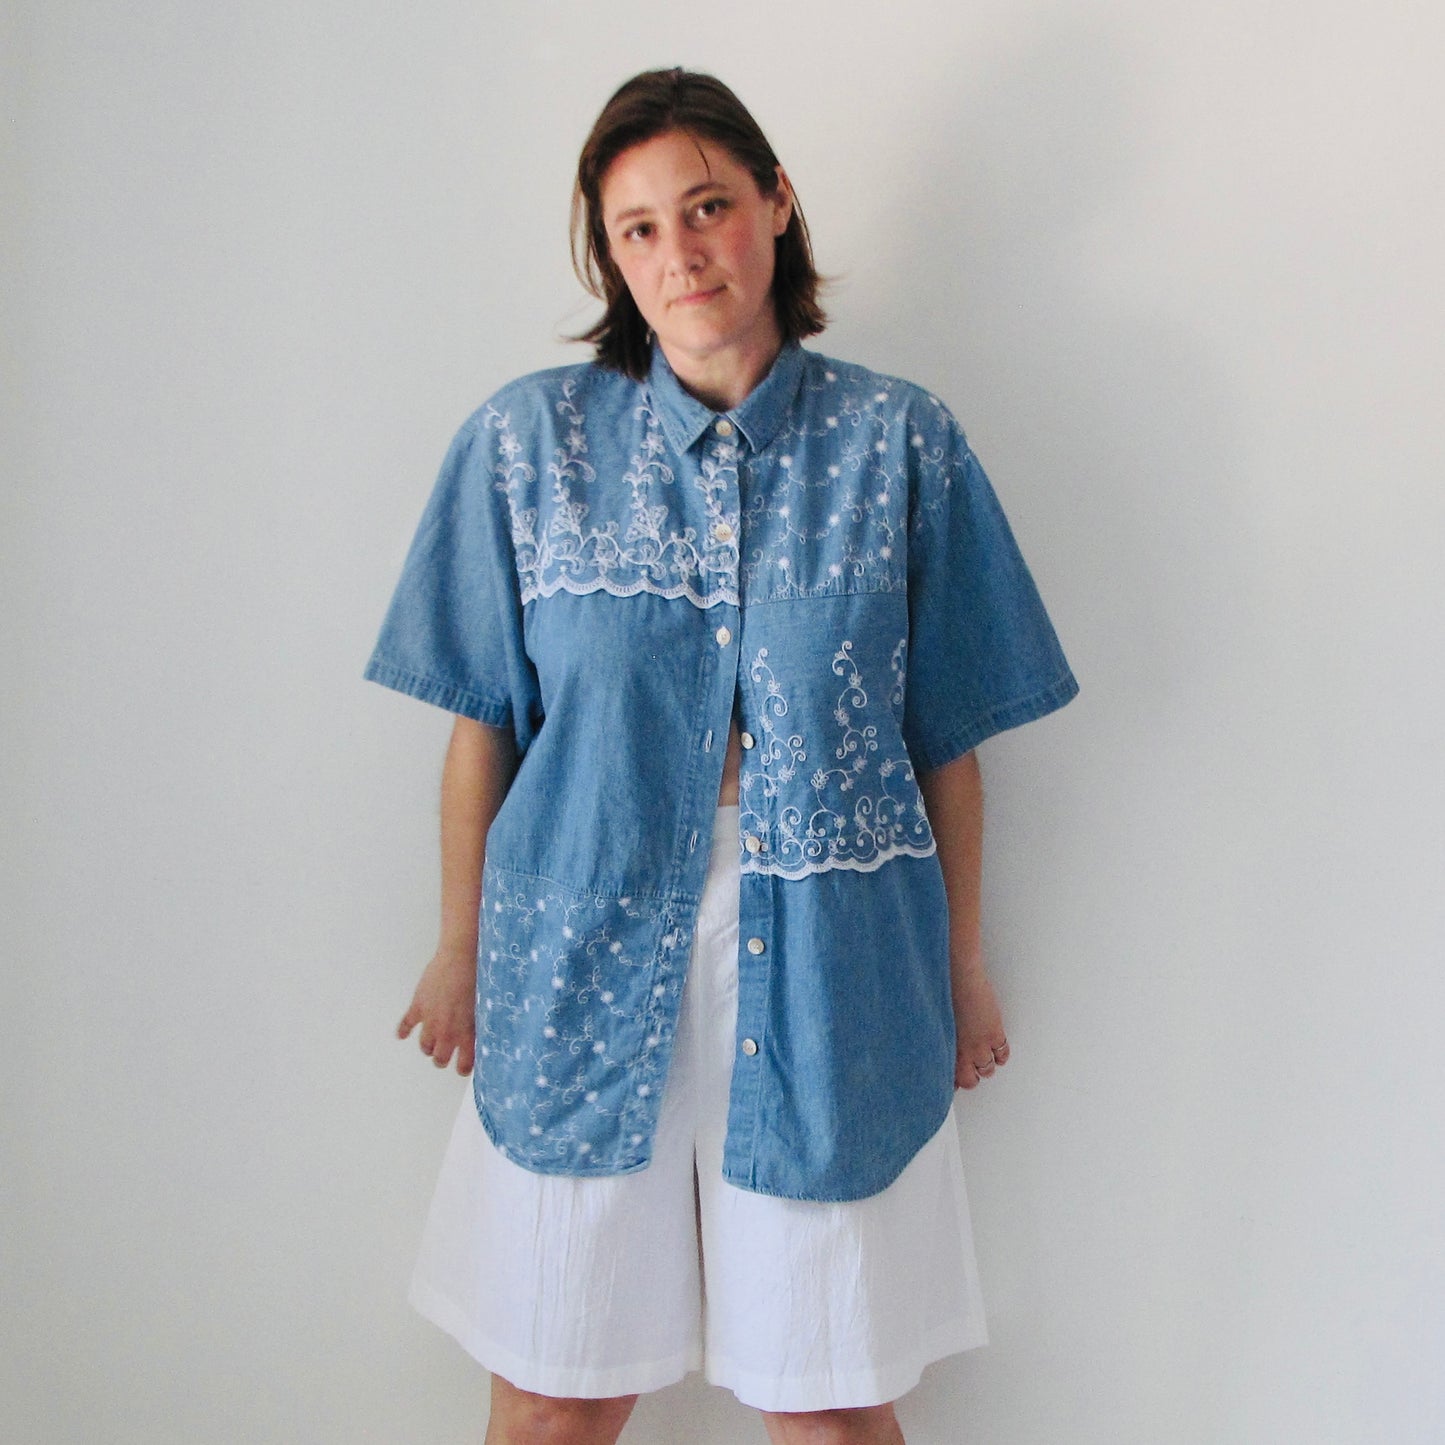 Denim & Embroidery Button Up